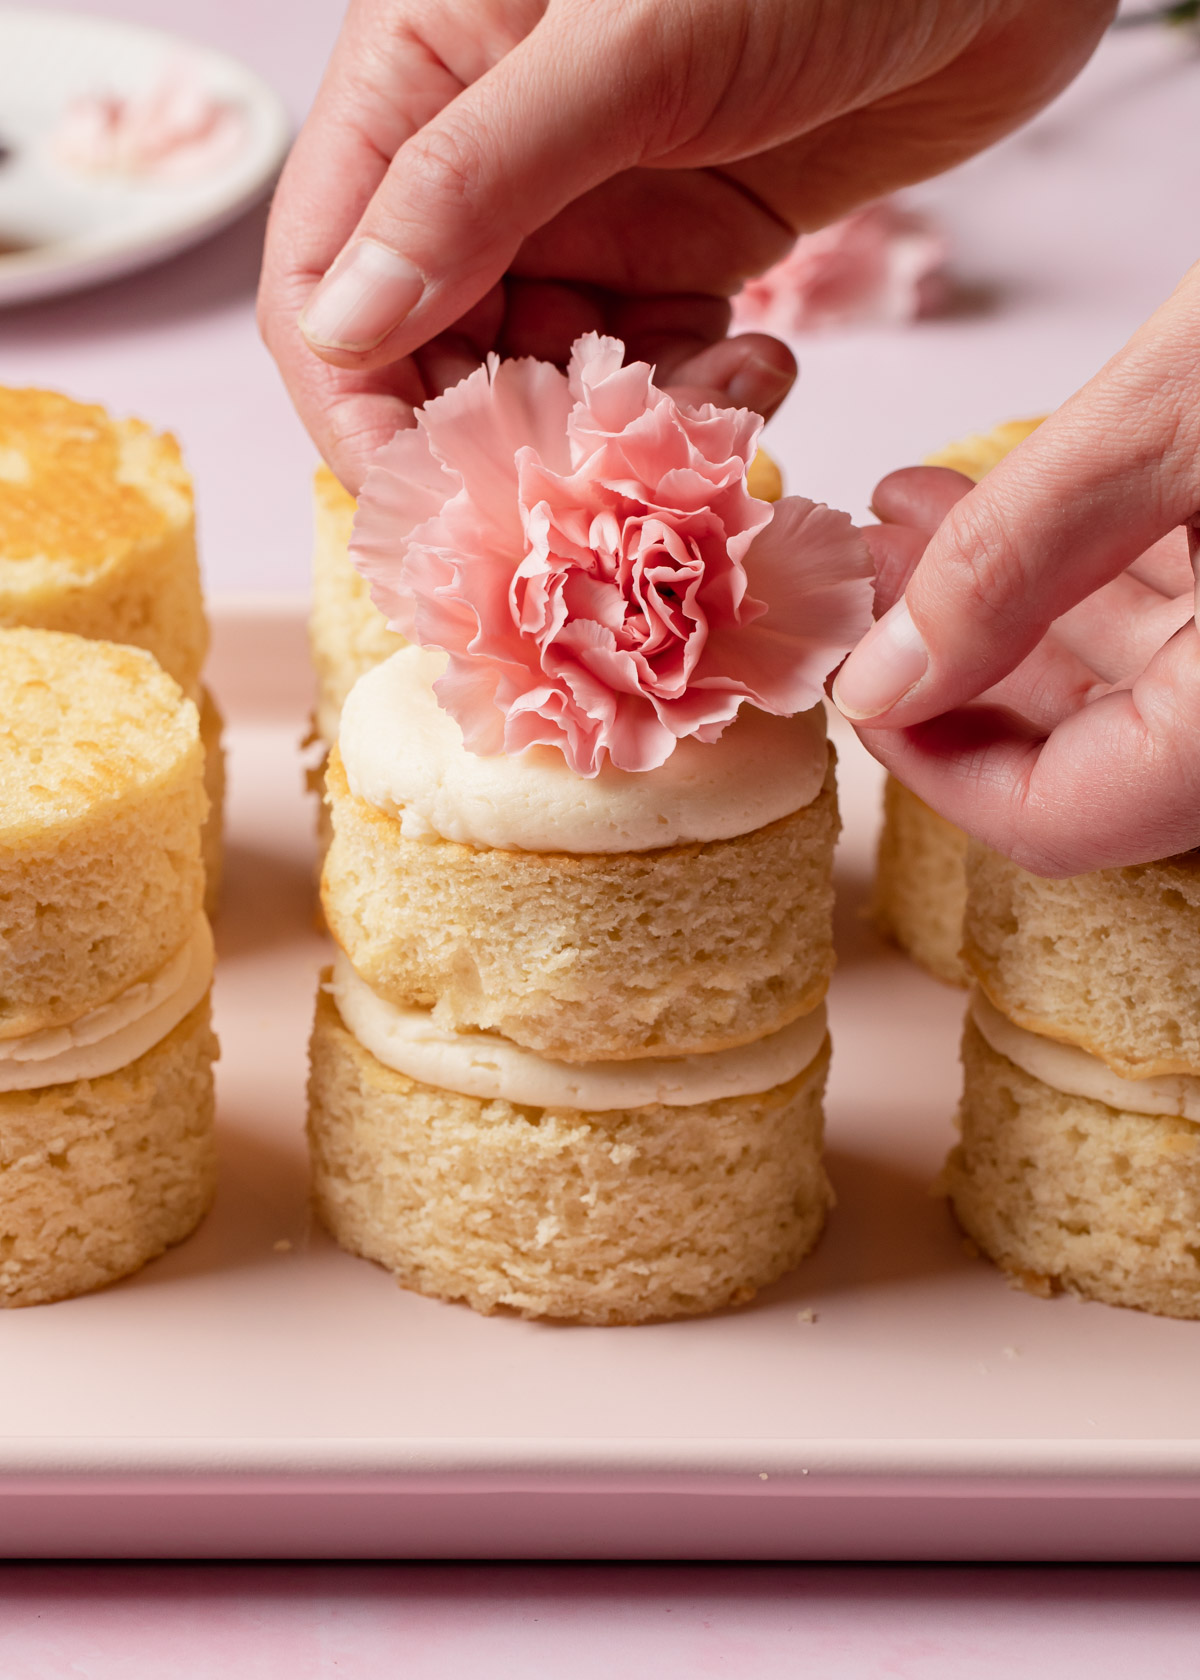 Placing a pink flower on top of a mini vanilla cake